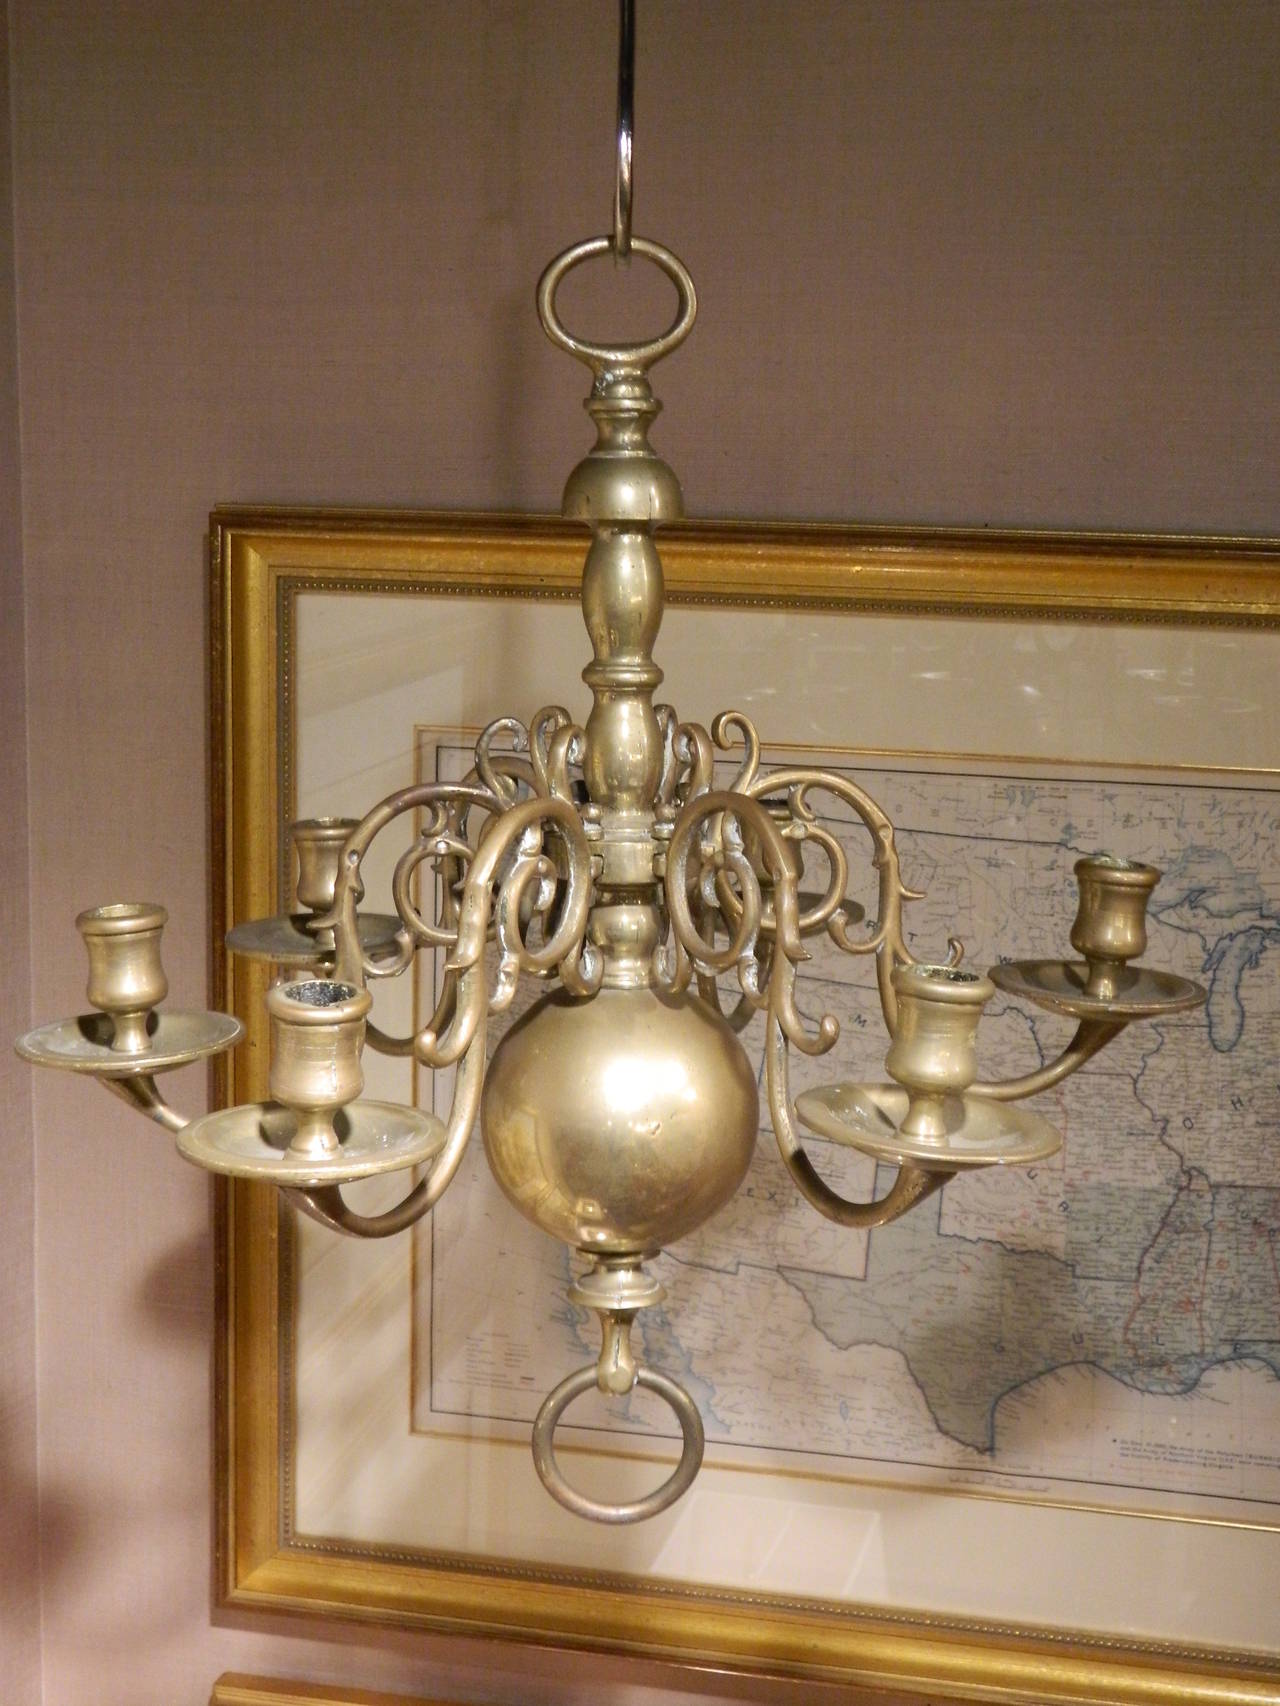 Early 19th Century Dutch Style Brass Six Light Pegged Chandelier.  This chandelier can not be electrified as it is too small for all the wires.